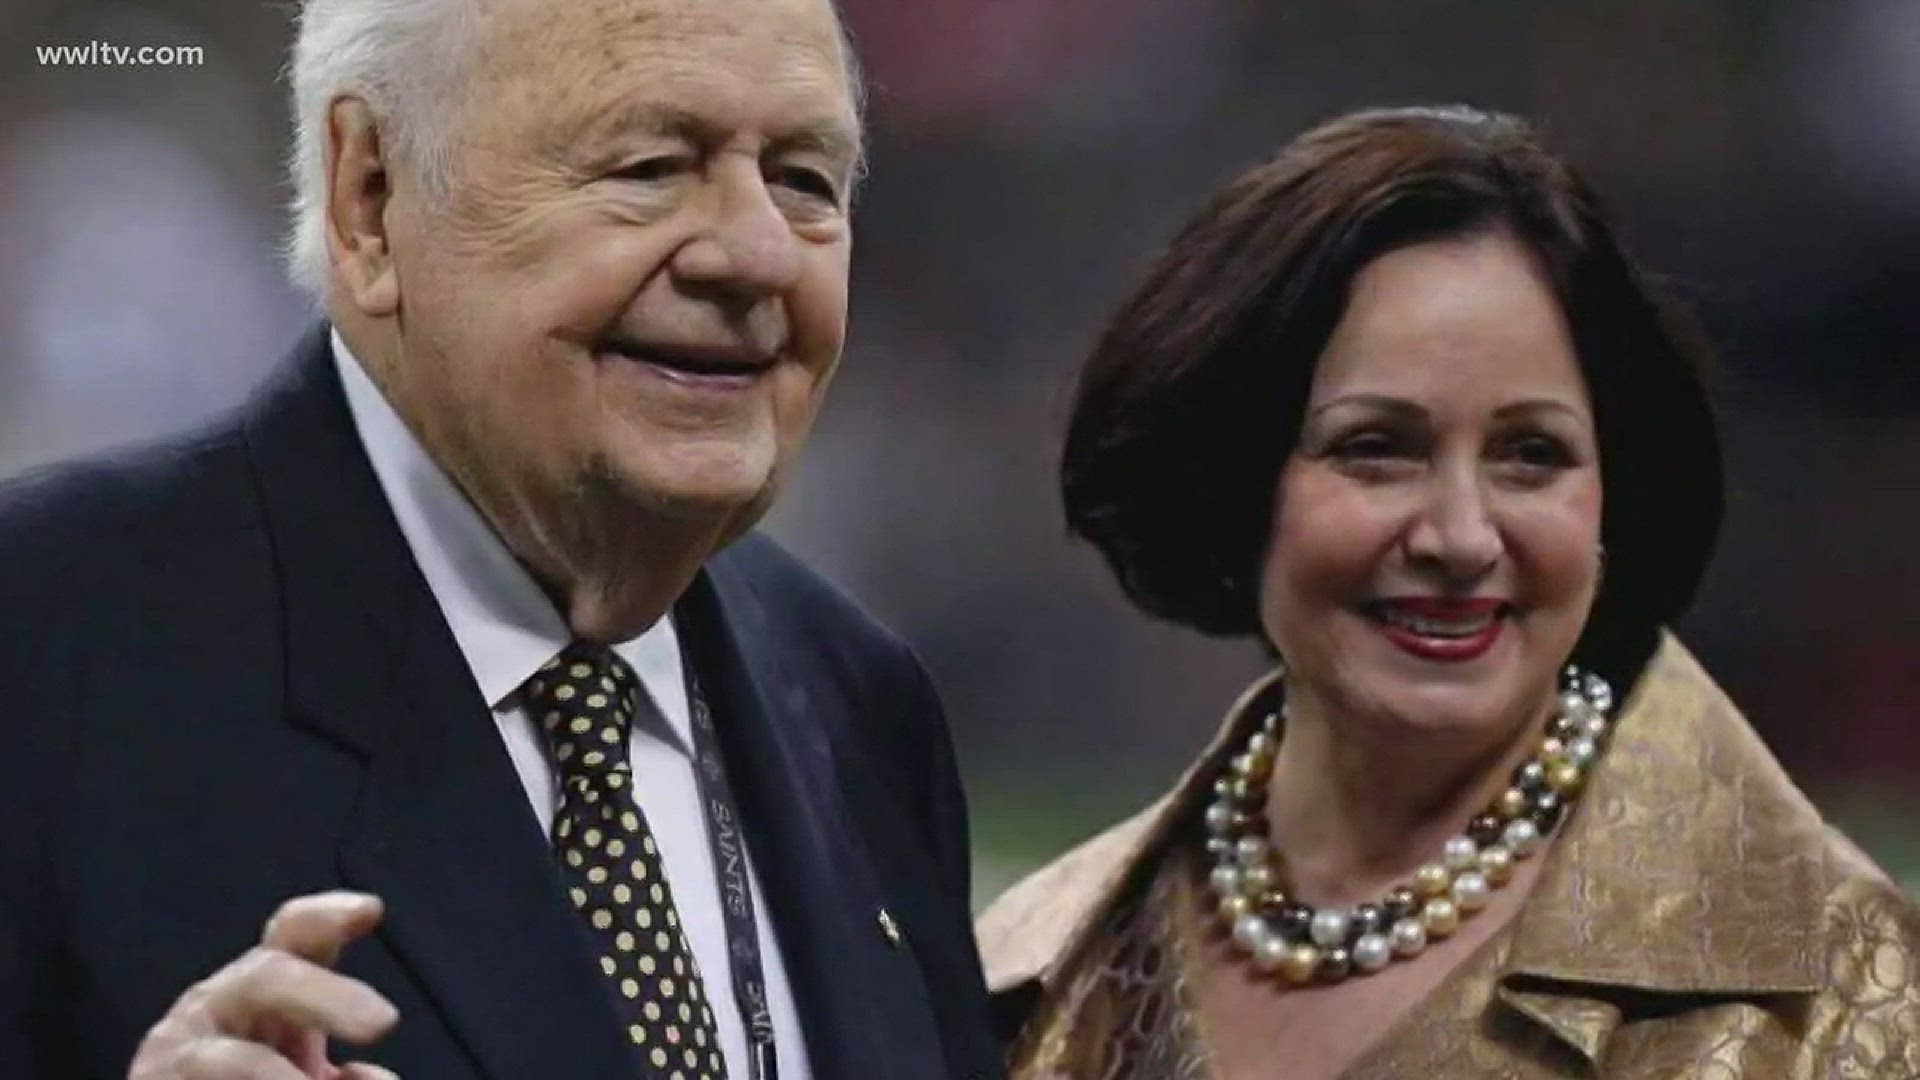 Gayle Benson will take control of Tom Benson's sports empire after his death.